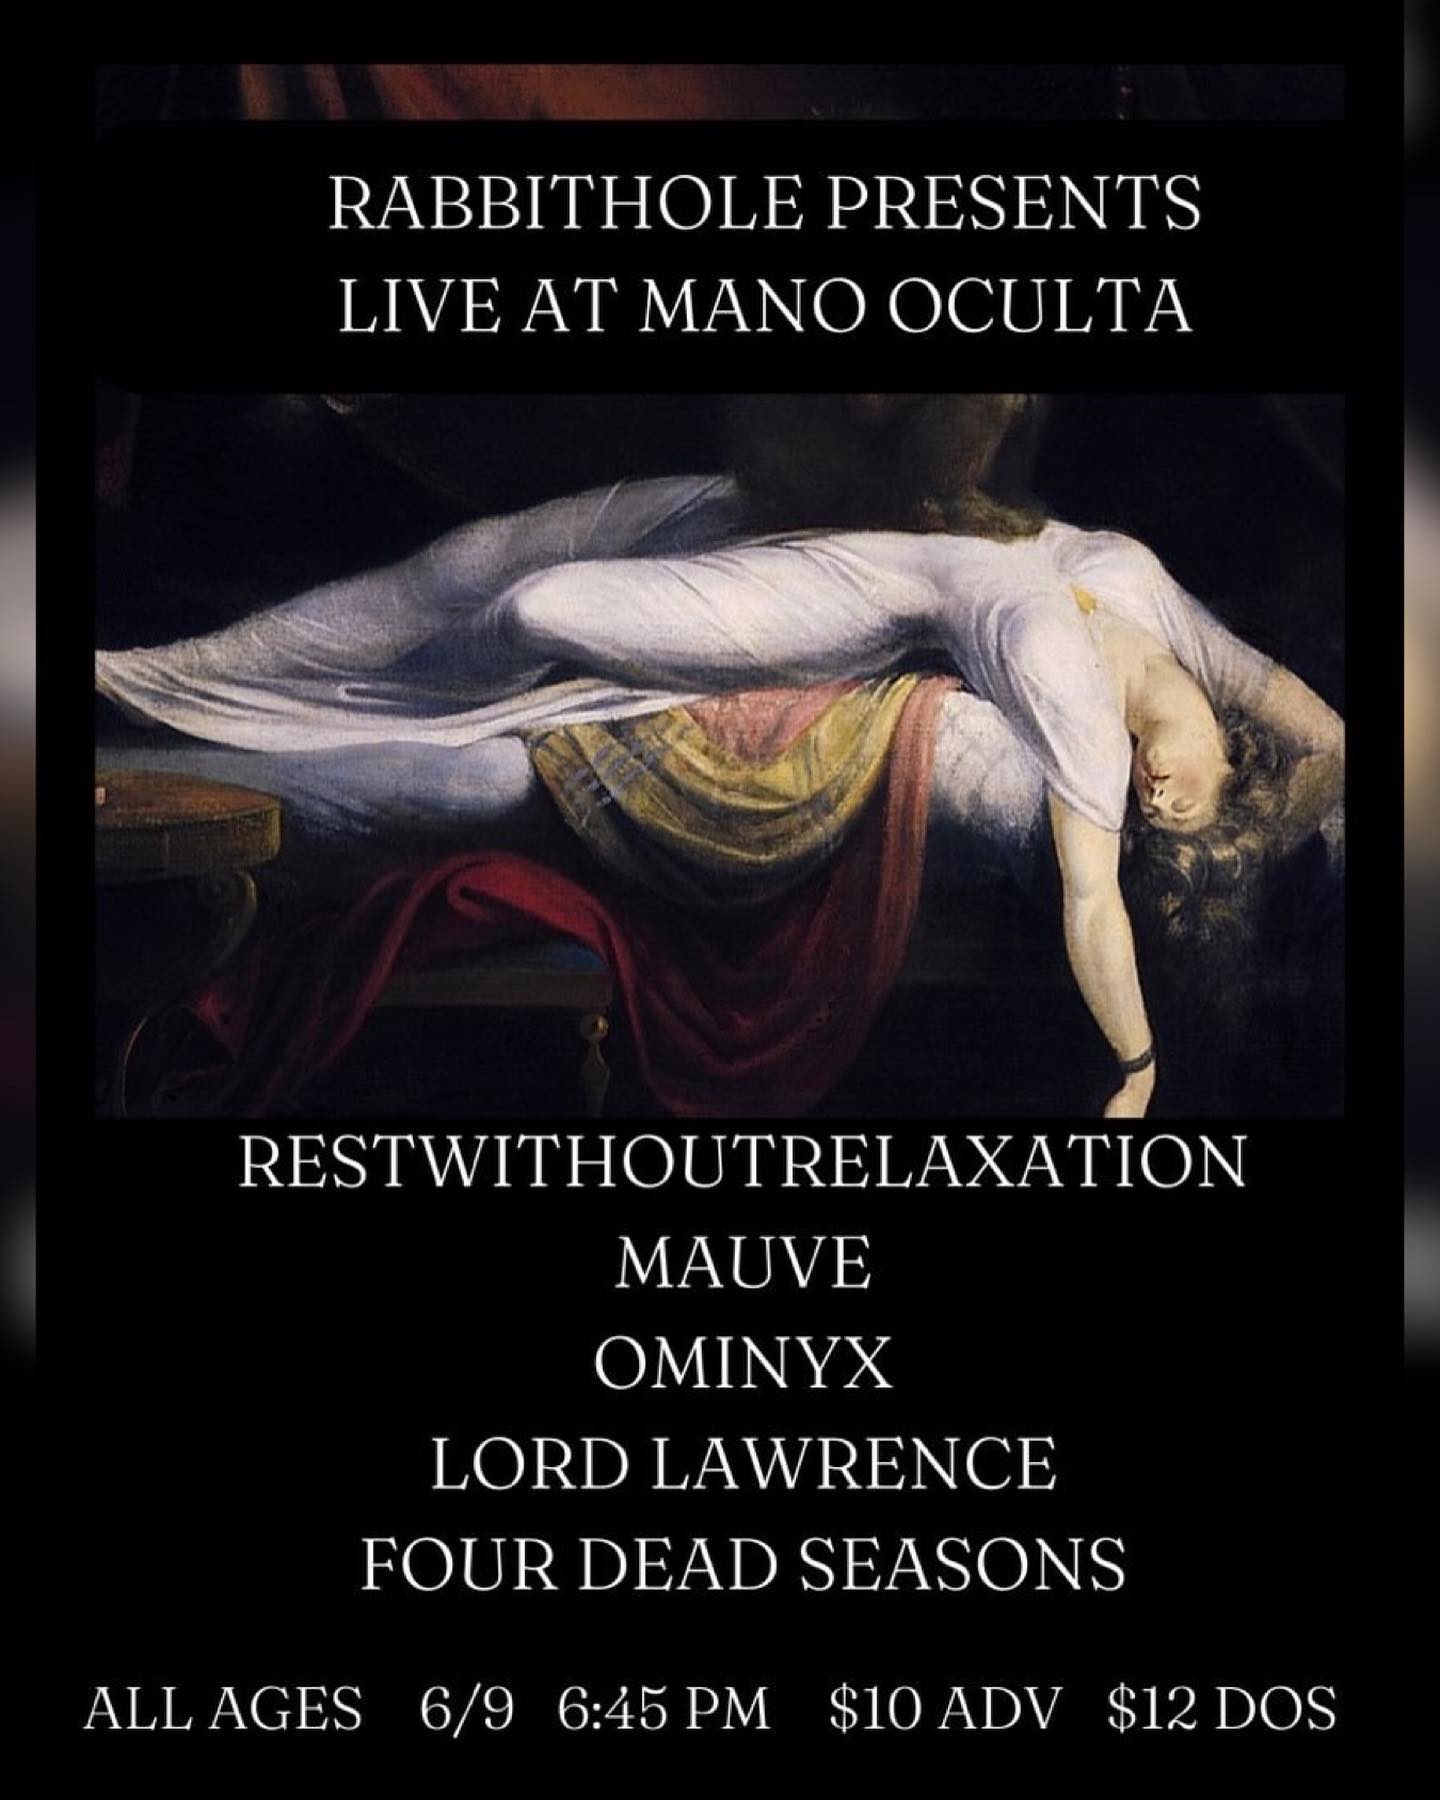 Rest Without Relaxation, Mauve, Ominyx, Lord Lawrence, Four Dead Seasons